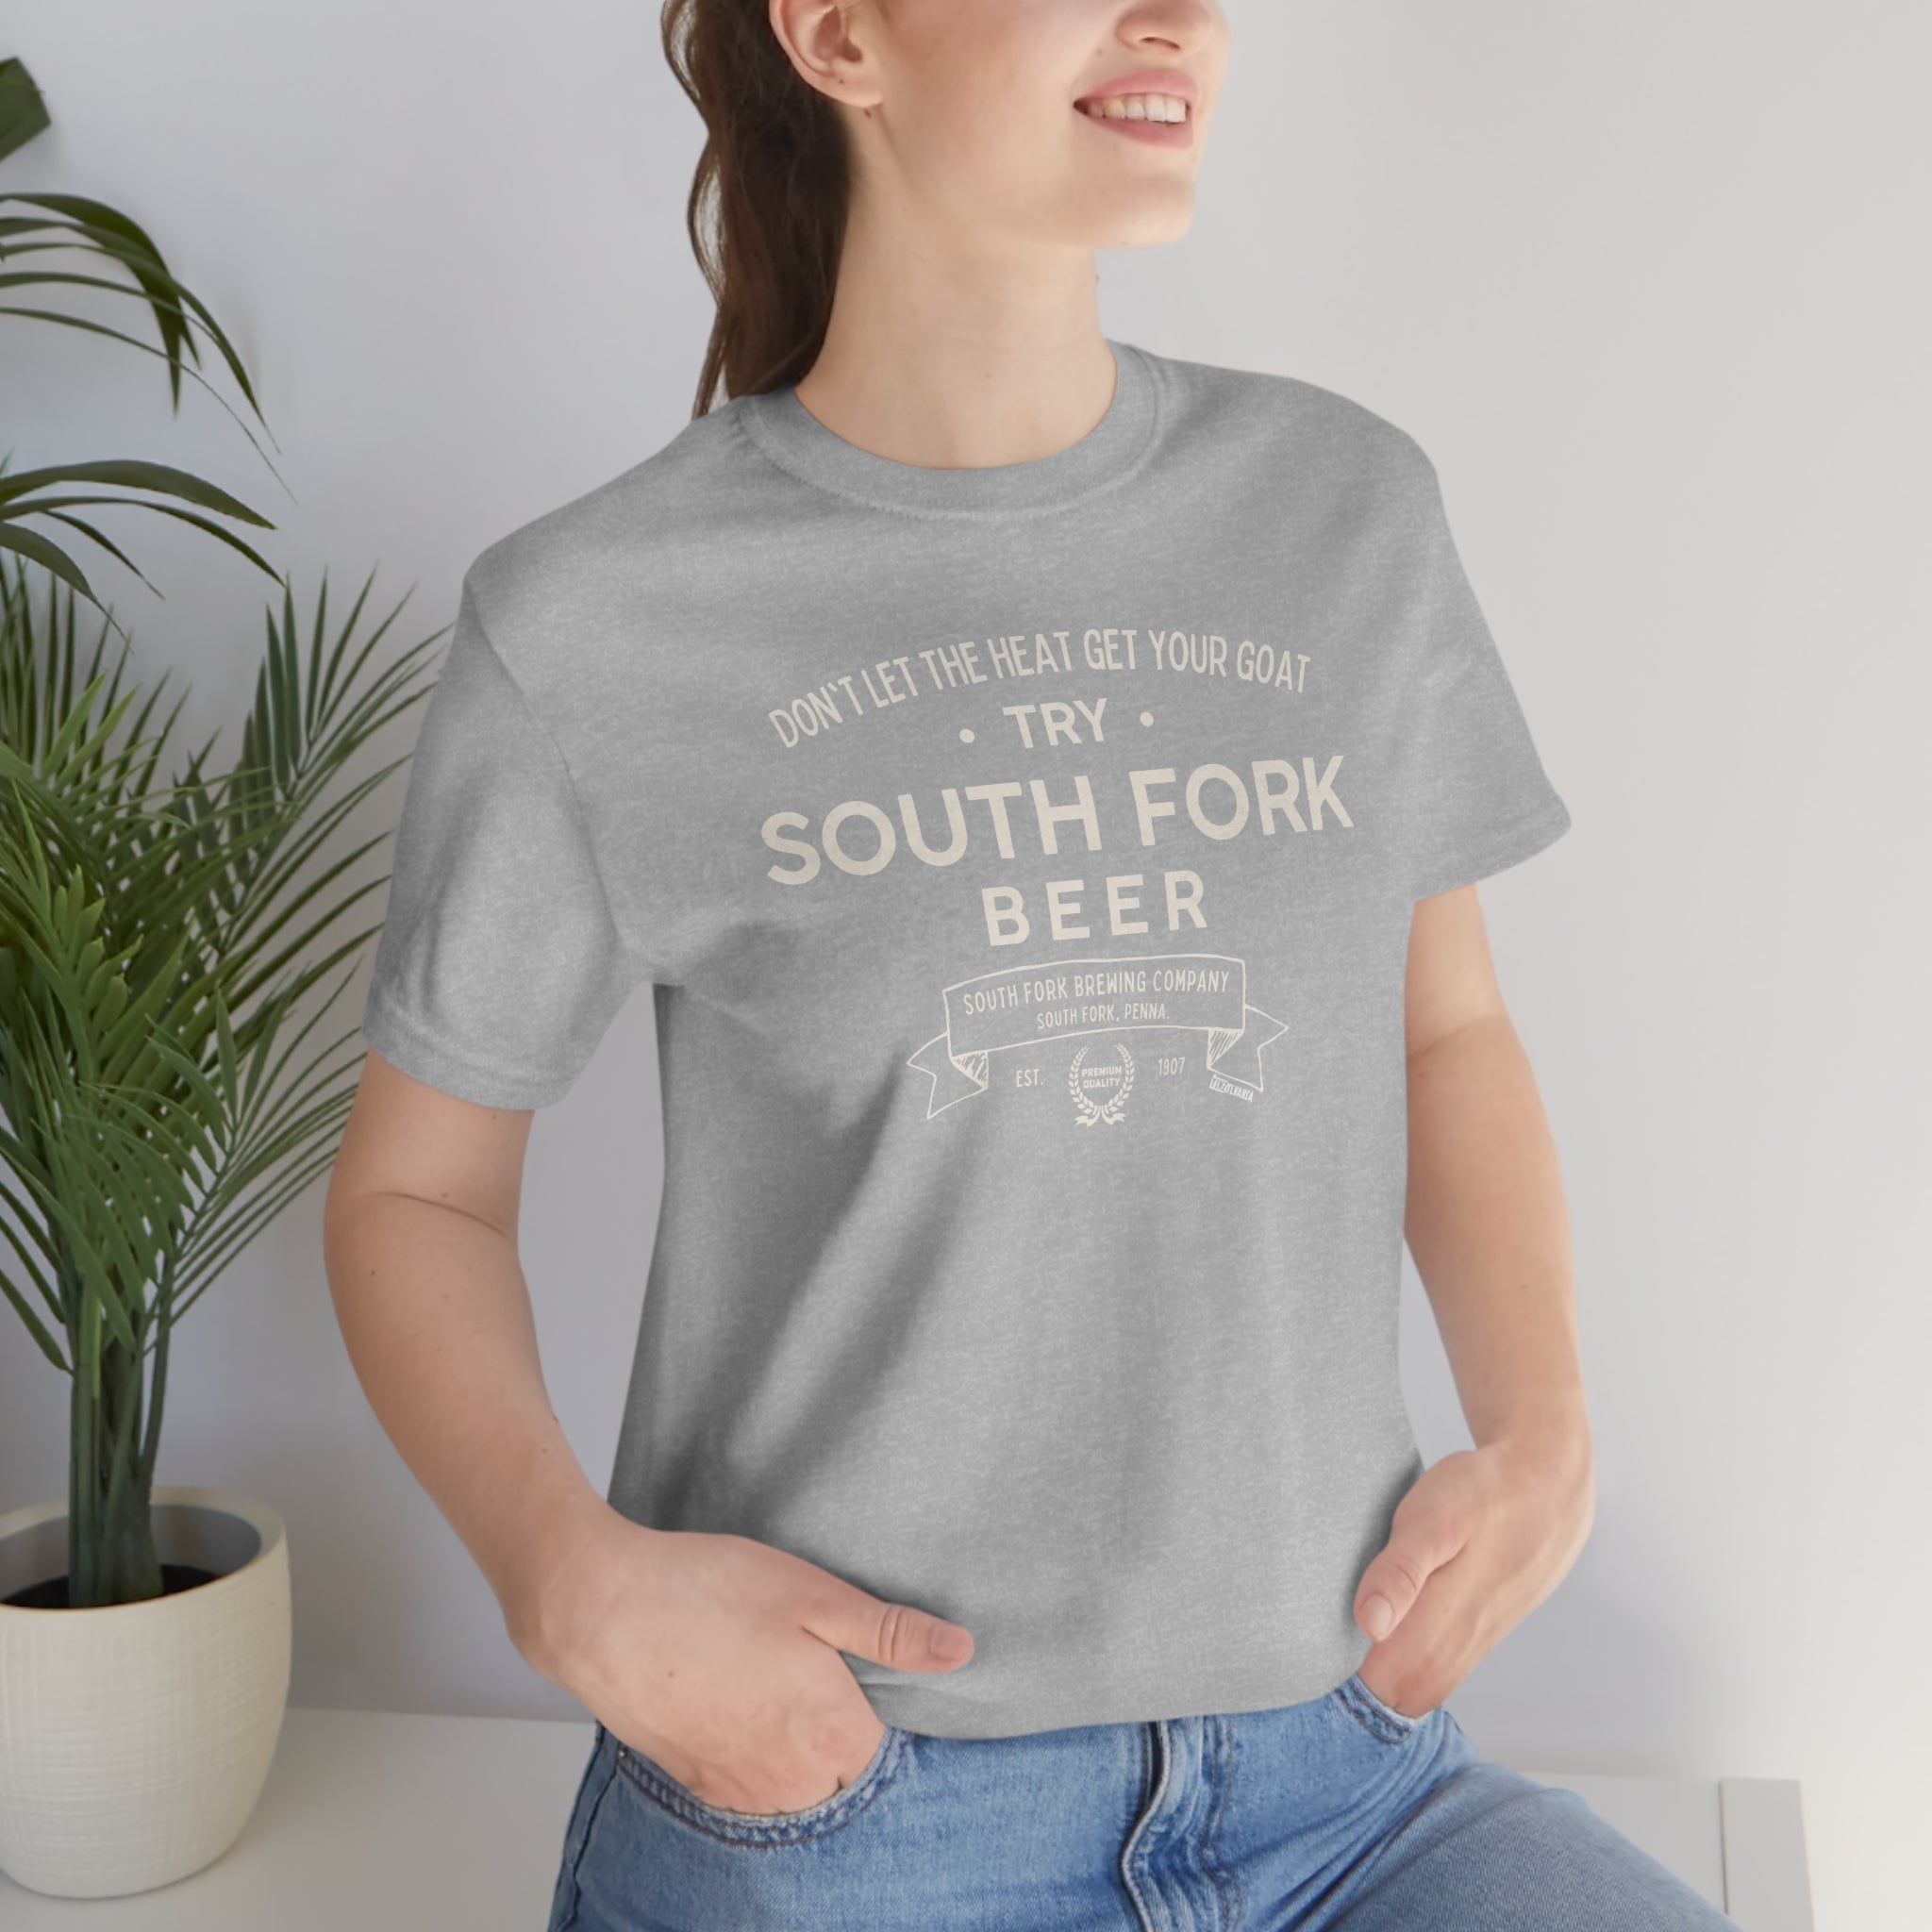 South Fork Beer - South Fork, PA - Yinzylvania